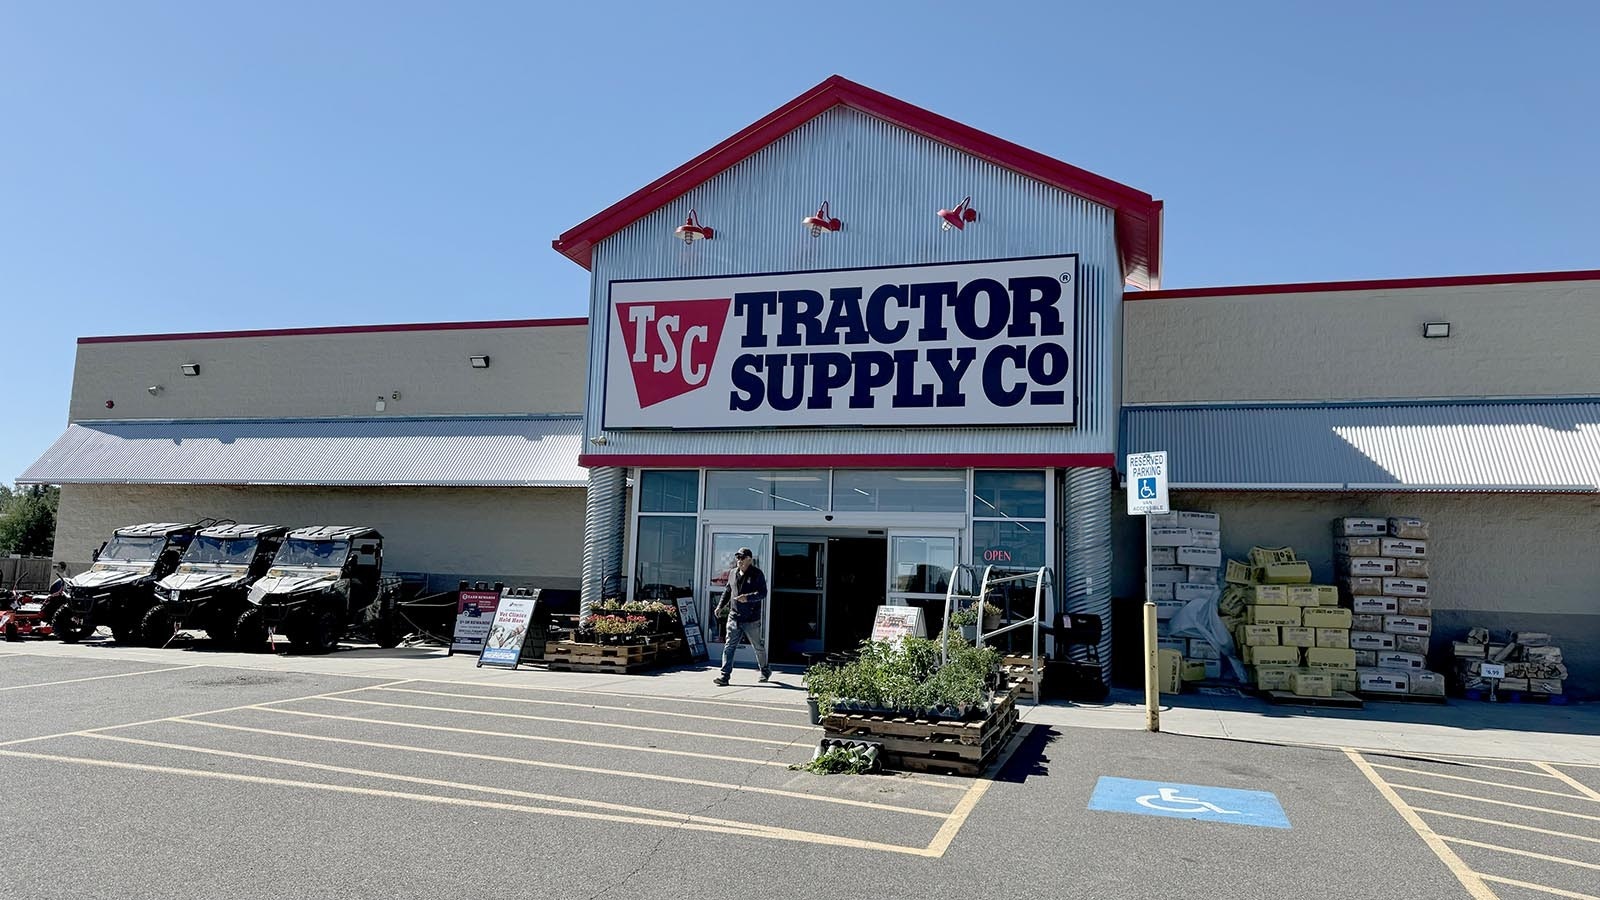 Tractor Supply Co. store in Cheyenne, Wyoming.